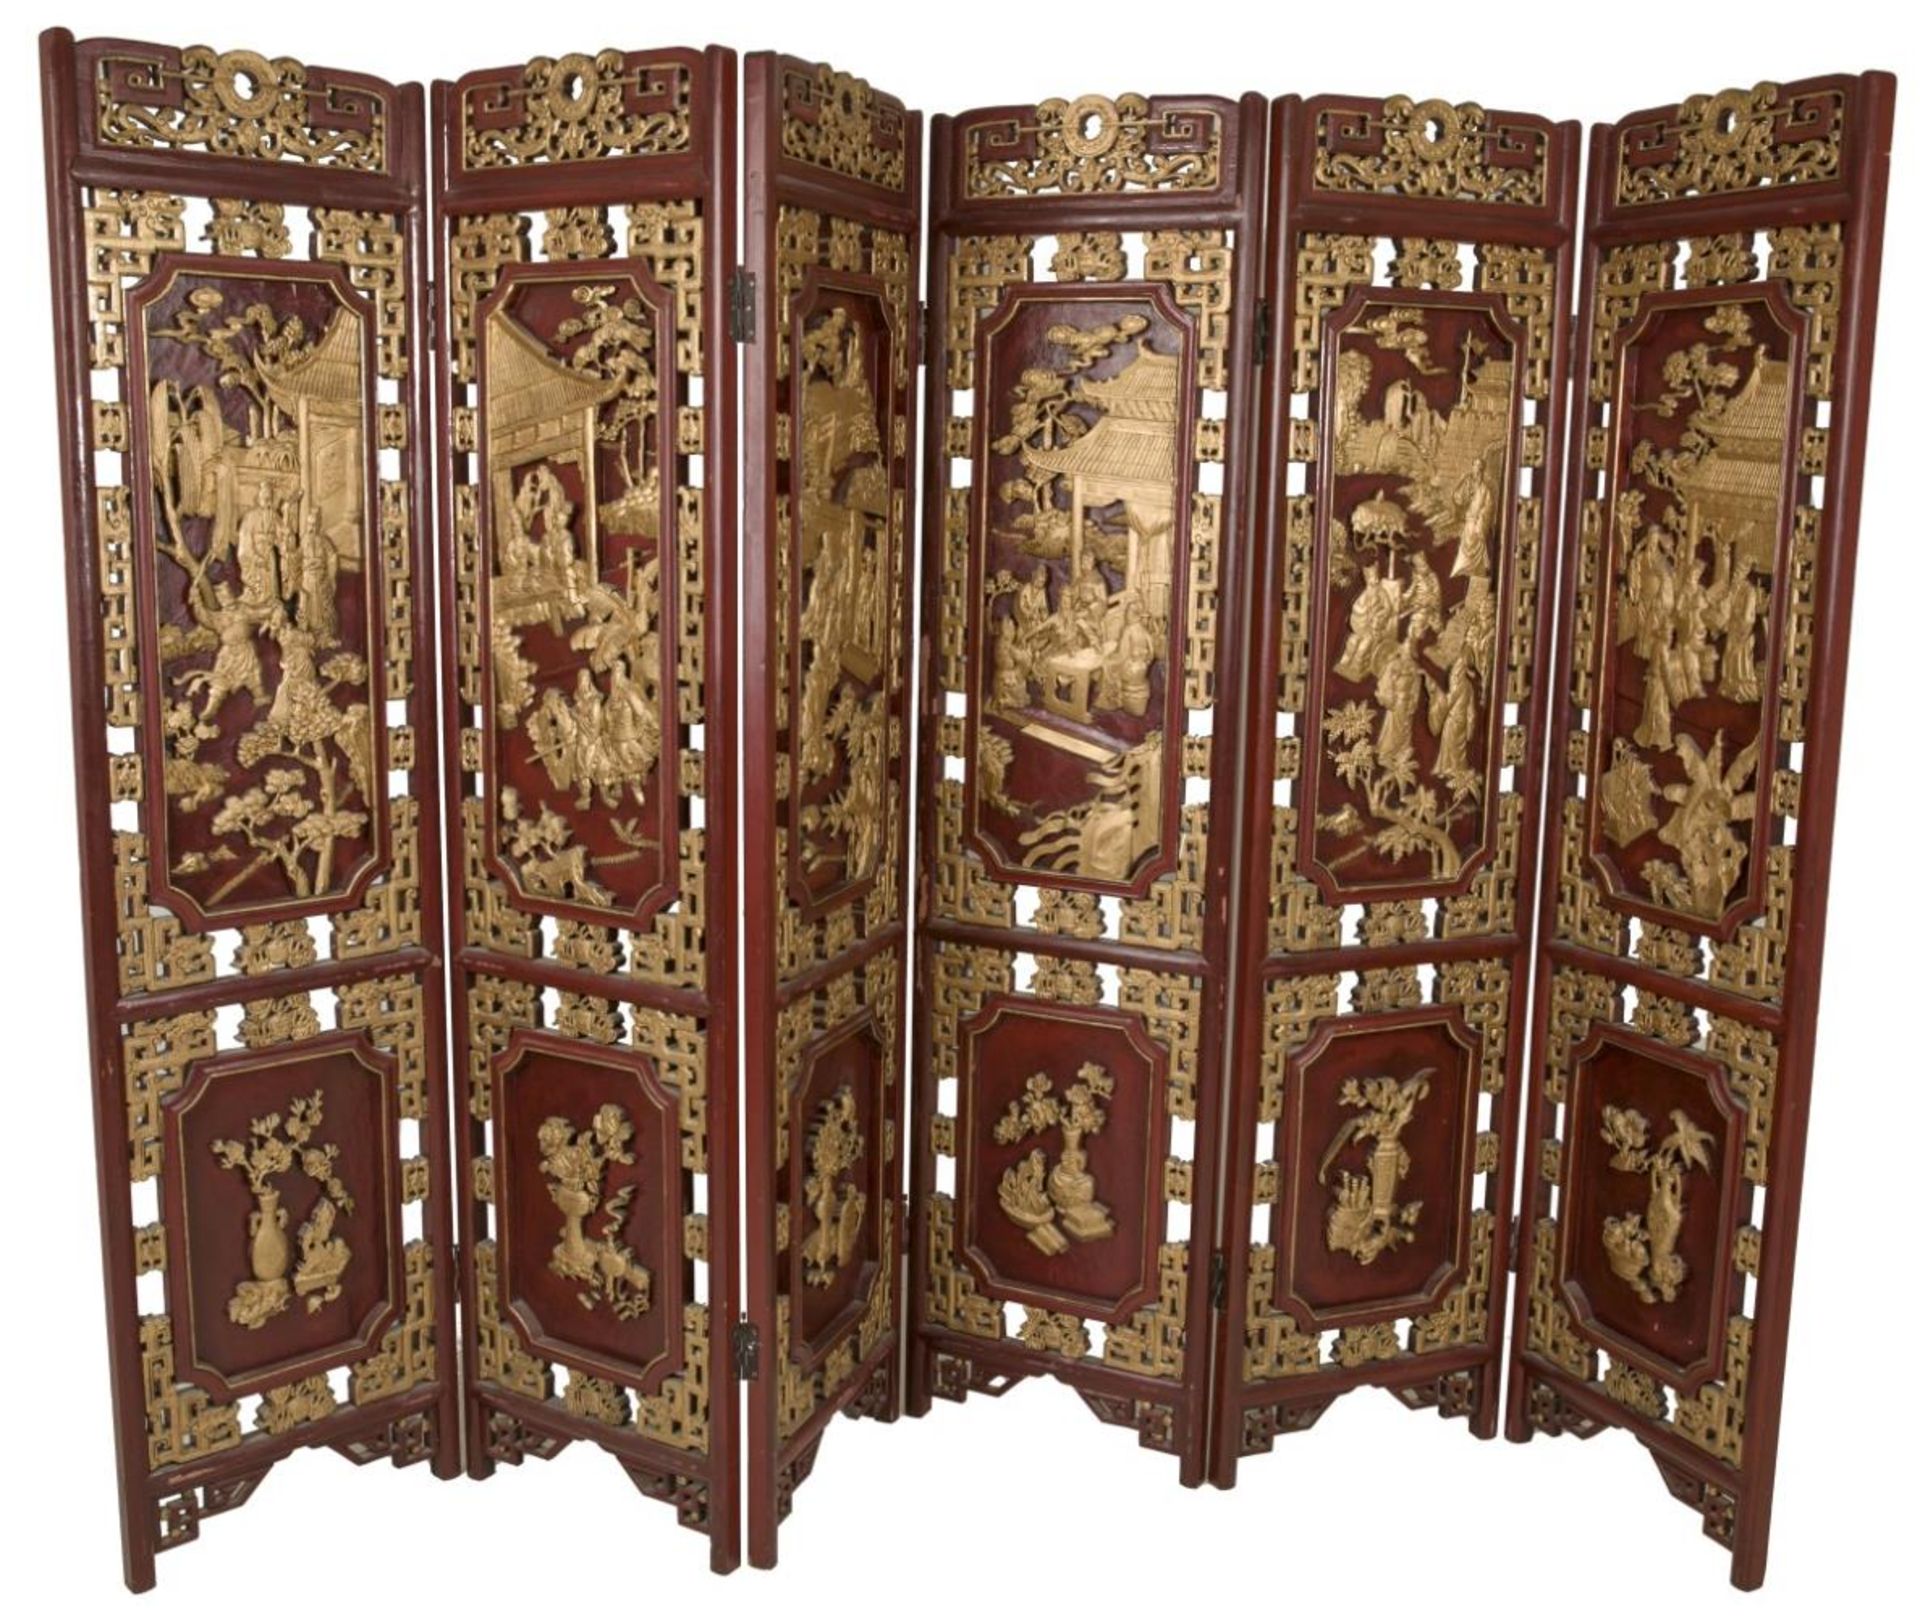 A red lacquered 6-leaf folding screen. China, late 20th century.